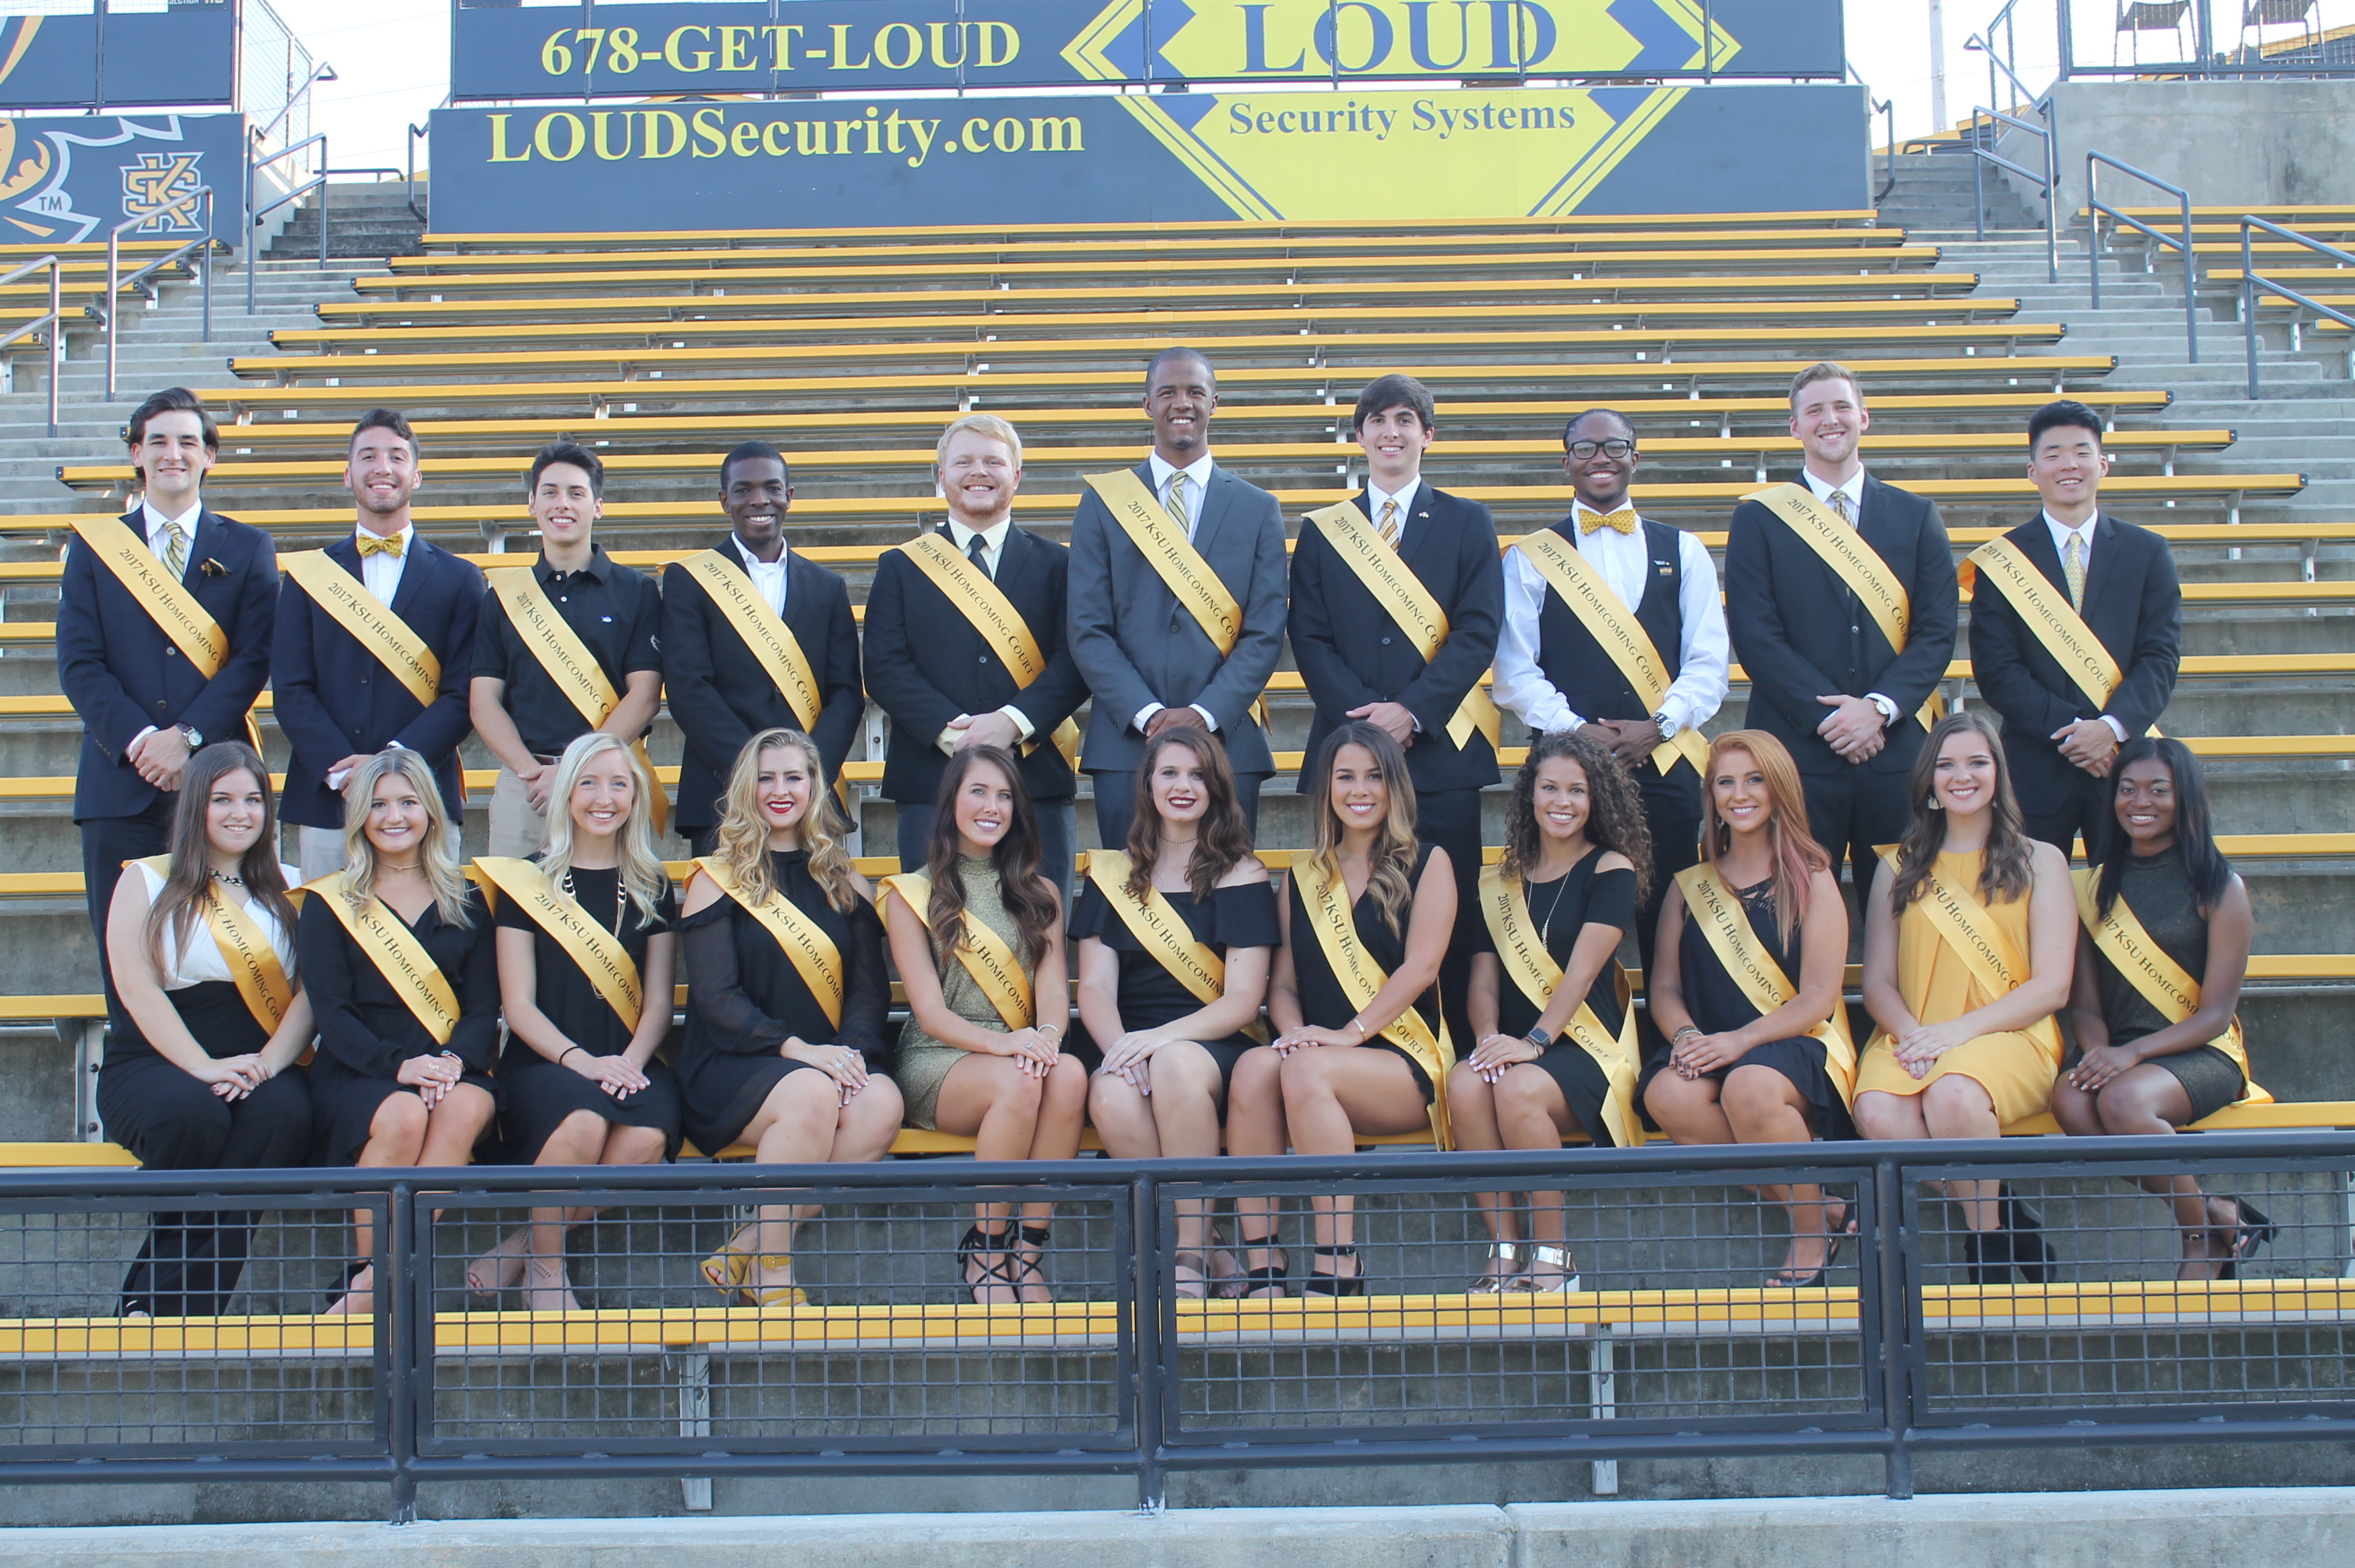 Homecoming court falls short in showing school’s diversity